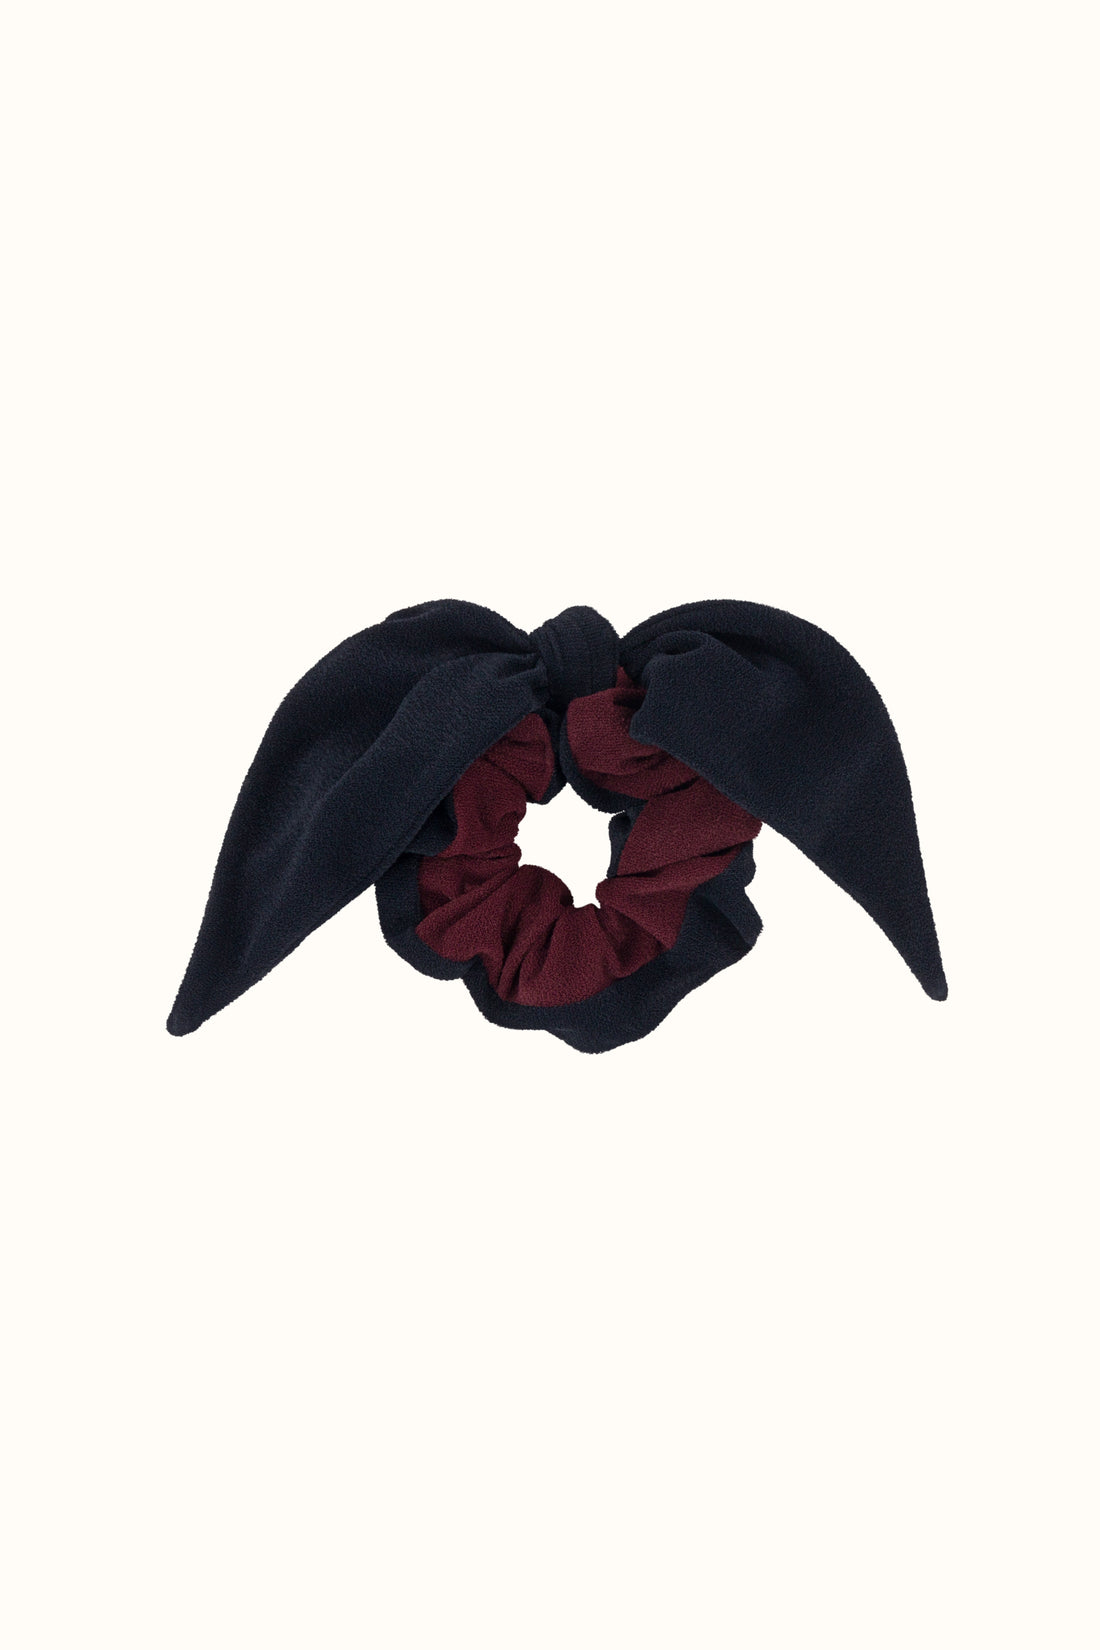 The Coco Terry Bow Scrunchie